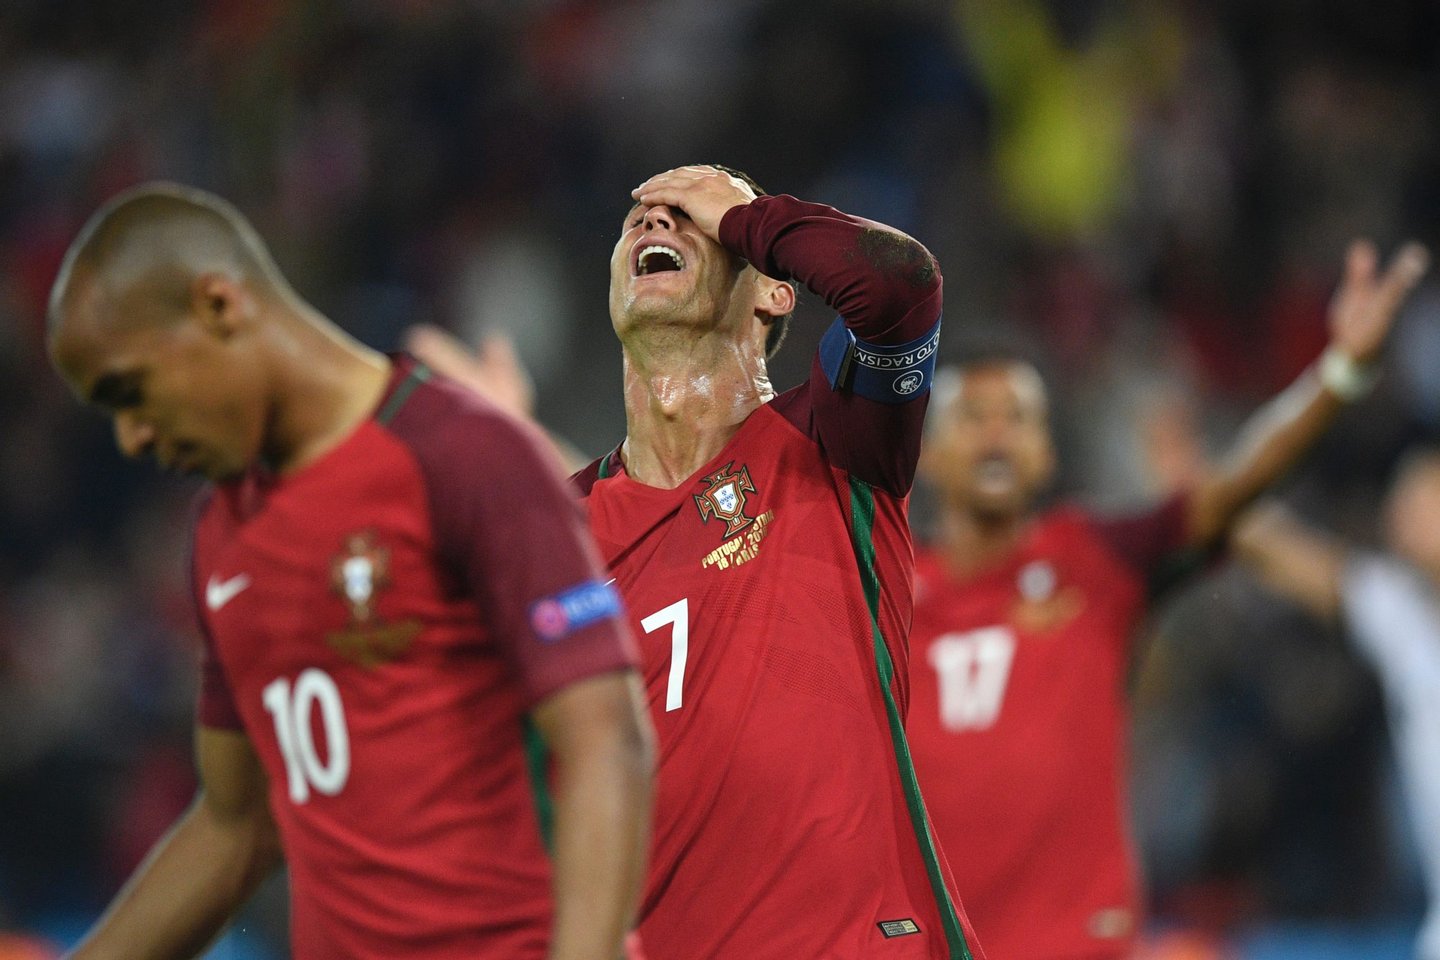 Portugal's forward Cristiano Ronaldo reacts after he missed to score a penalty during the Euro 2016 group F football match between Portugal and Austria at the Parc des Princes in Paris on June 18, 2016. / AFP / MARTIN BUREAU (Photo credit should read MARTIN BUREAU/AFP/Getty Images)